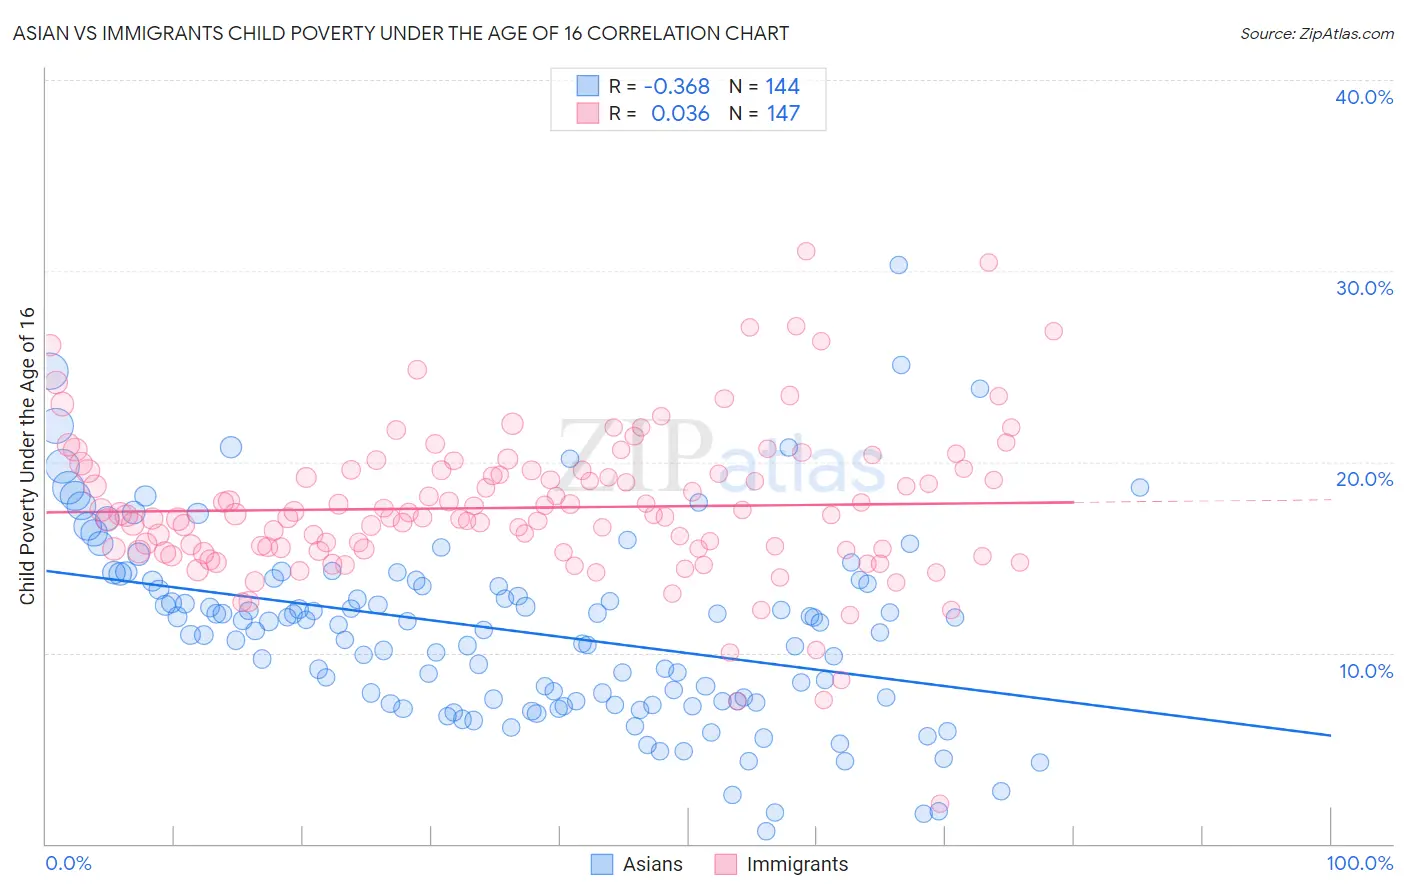 Asian vs Immigrants Child Poverty Under the Age of 16